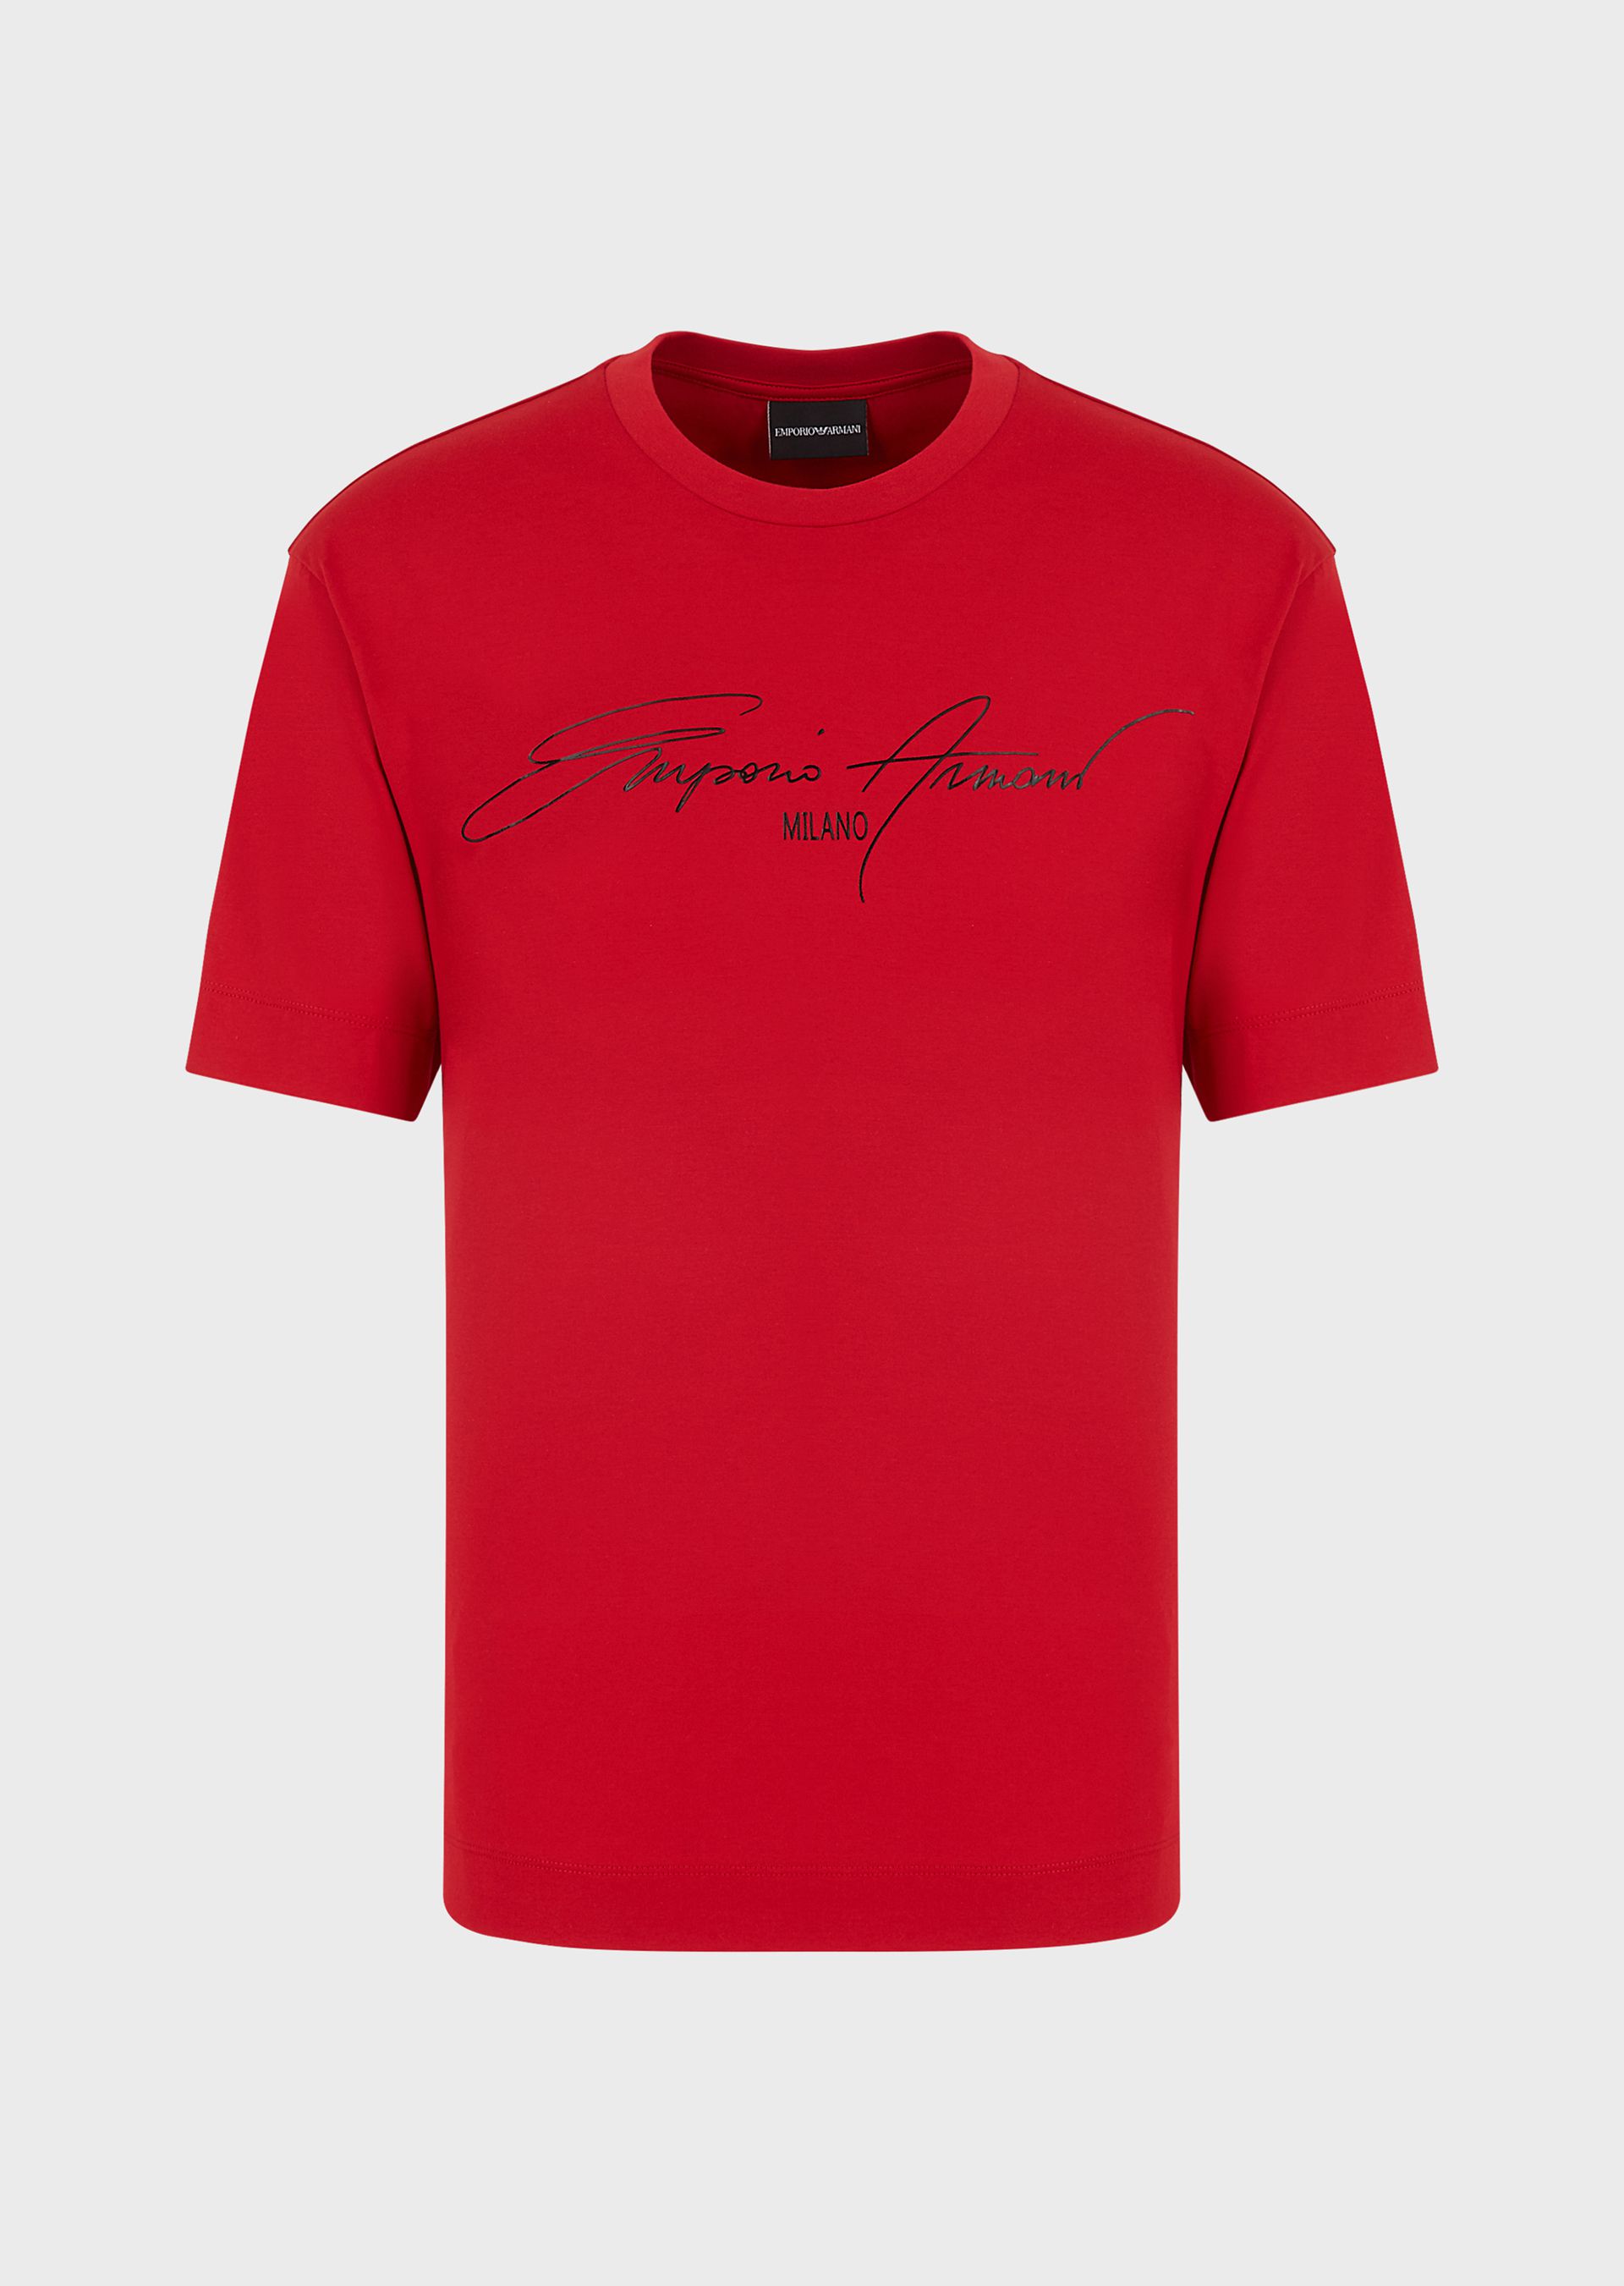 Emporio Armani T-shirts - Item 12469991 In Red | ModeSens